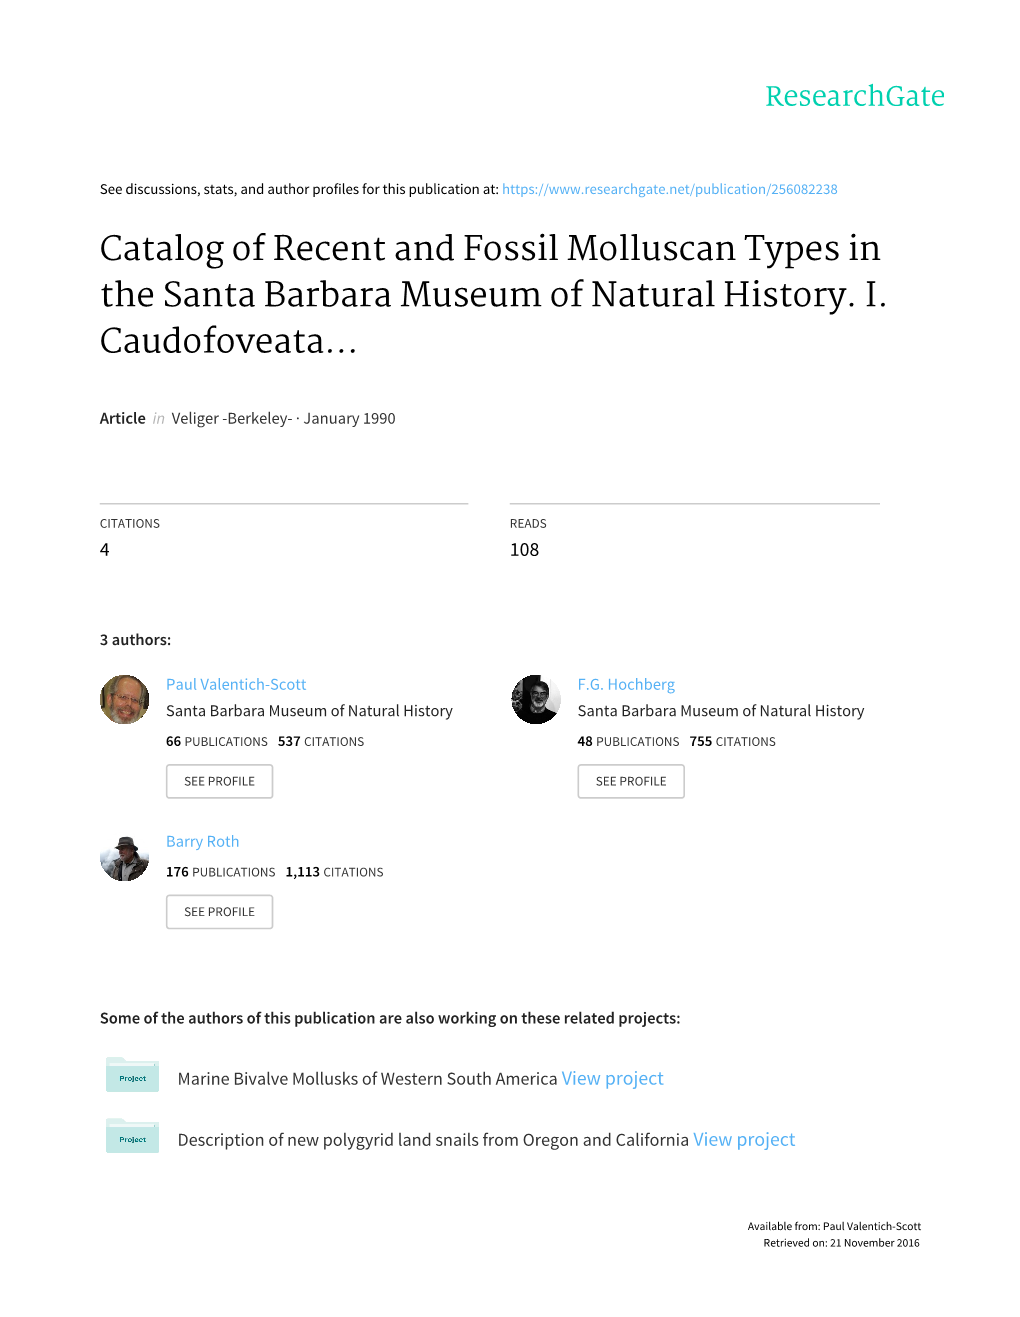 Catalog of Recent and Fossil Molluscan Types in the Santa Barbara Museum of Natural History. I. Caudofoveata